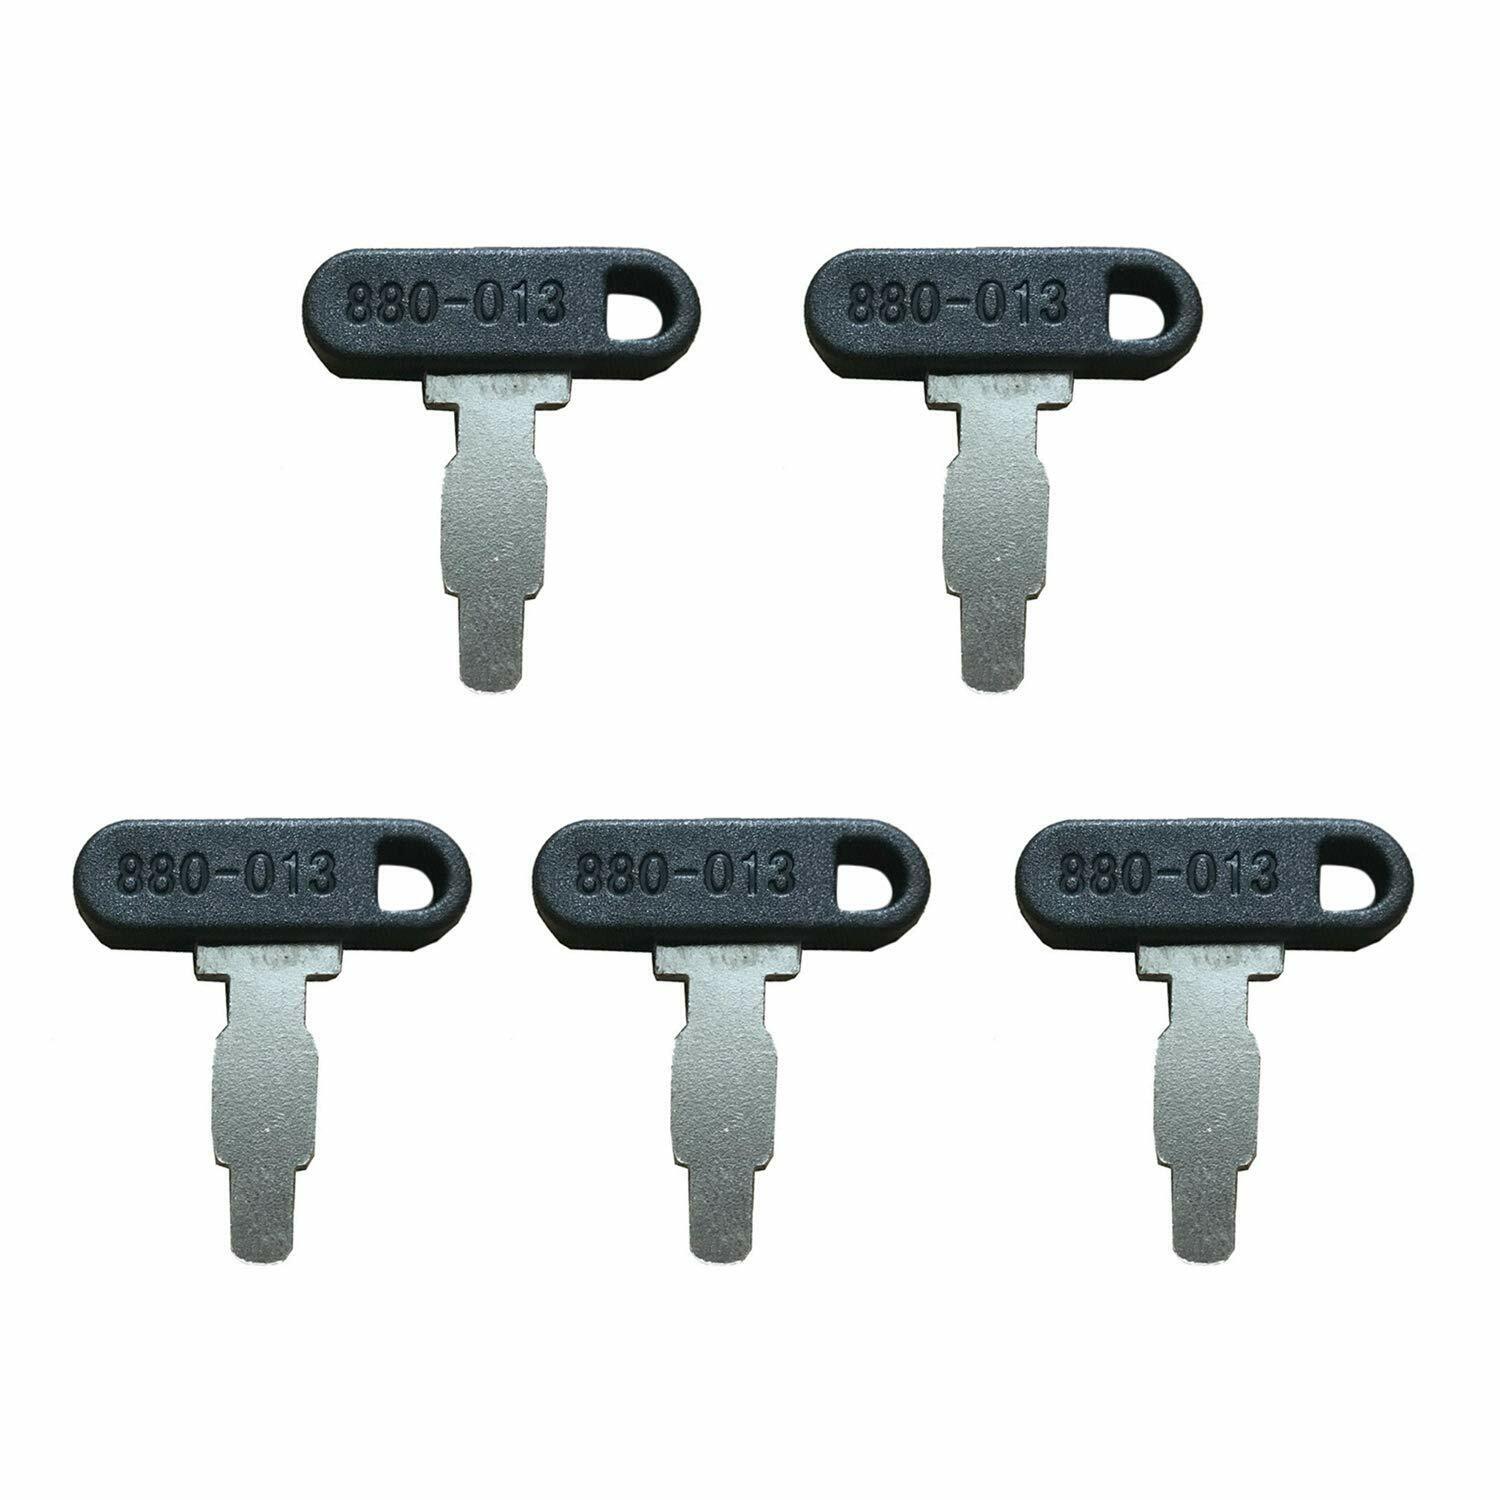 5 Replacement Honda Igntion Keys For Engines Generators Lawn Mowers 880-013